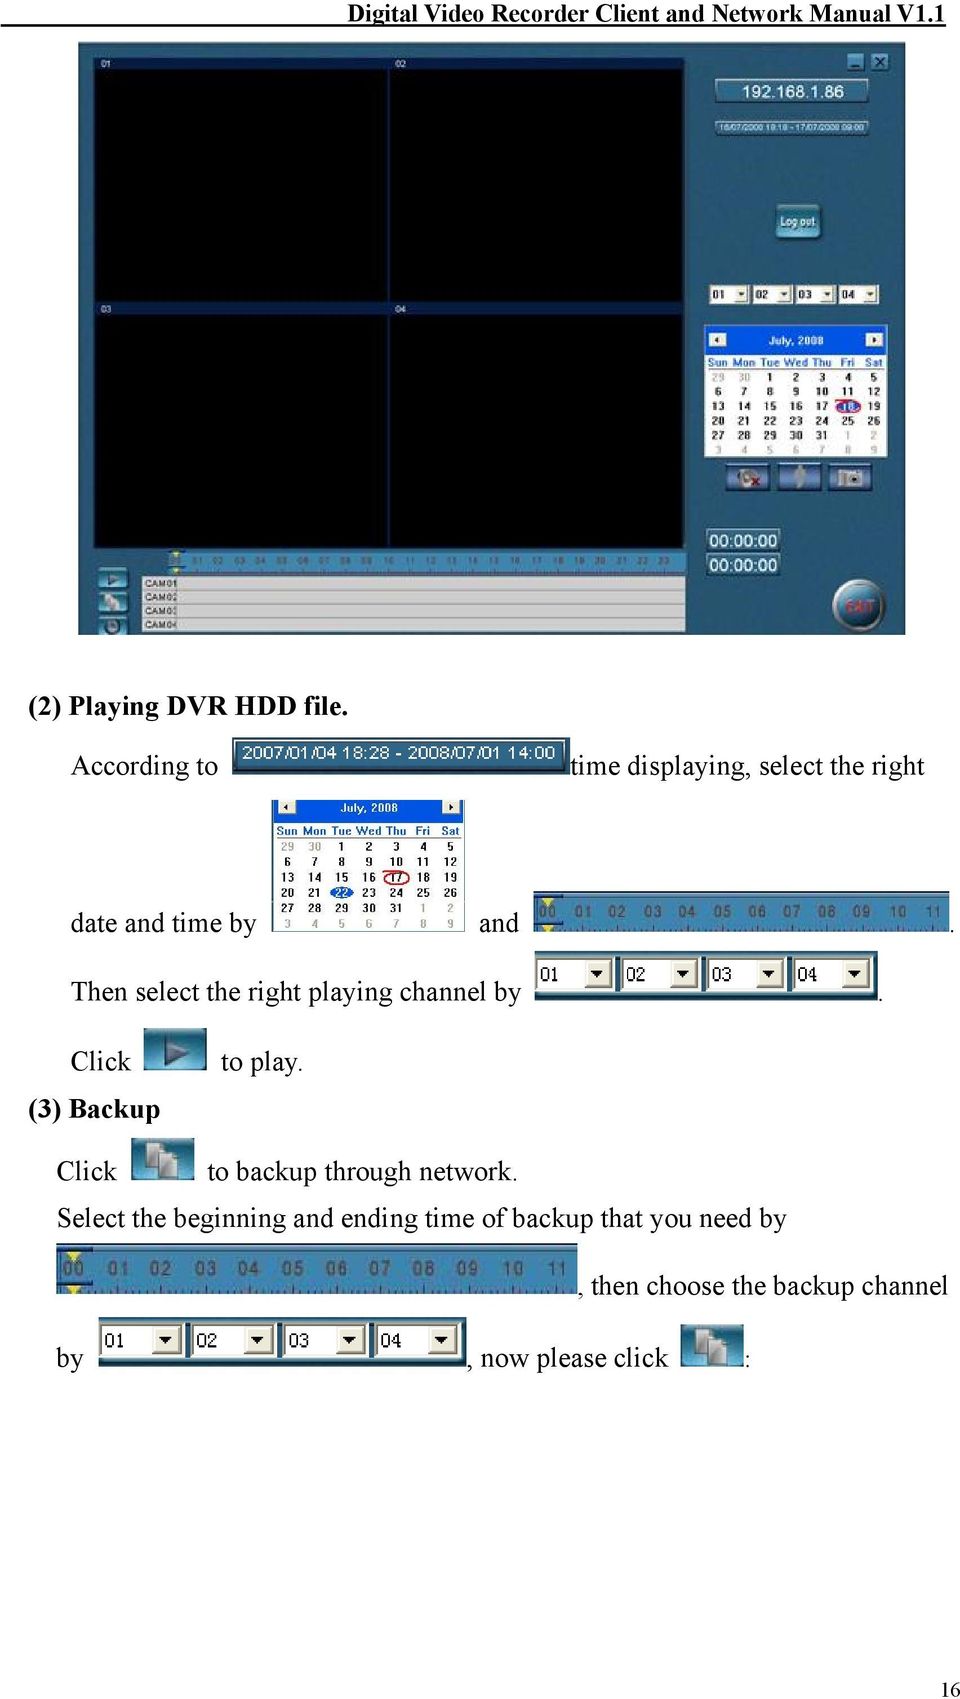 Then select the right playing channel by. Click (3) Backup to play.